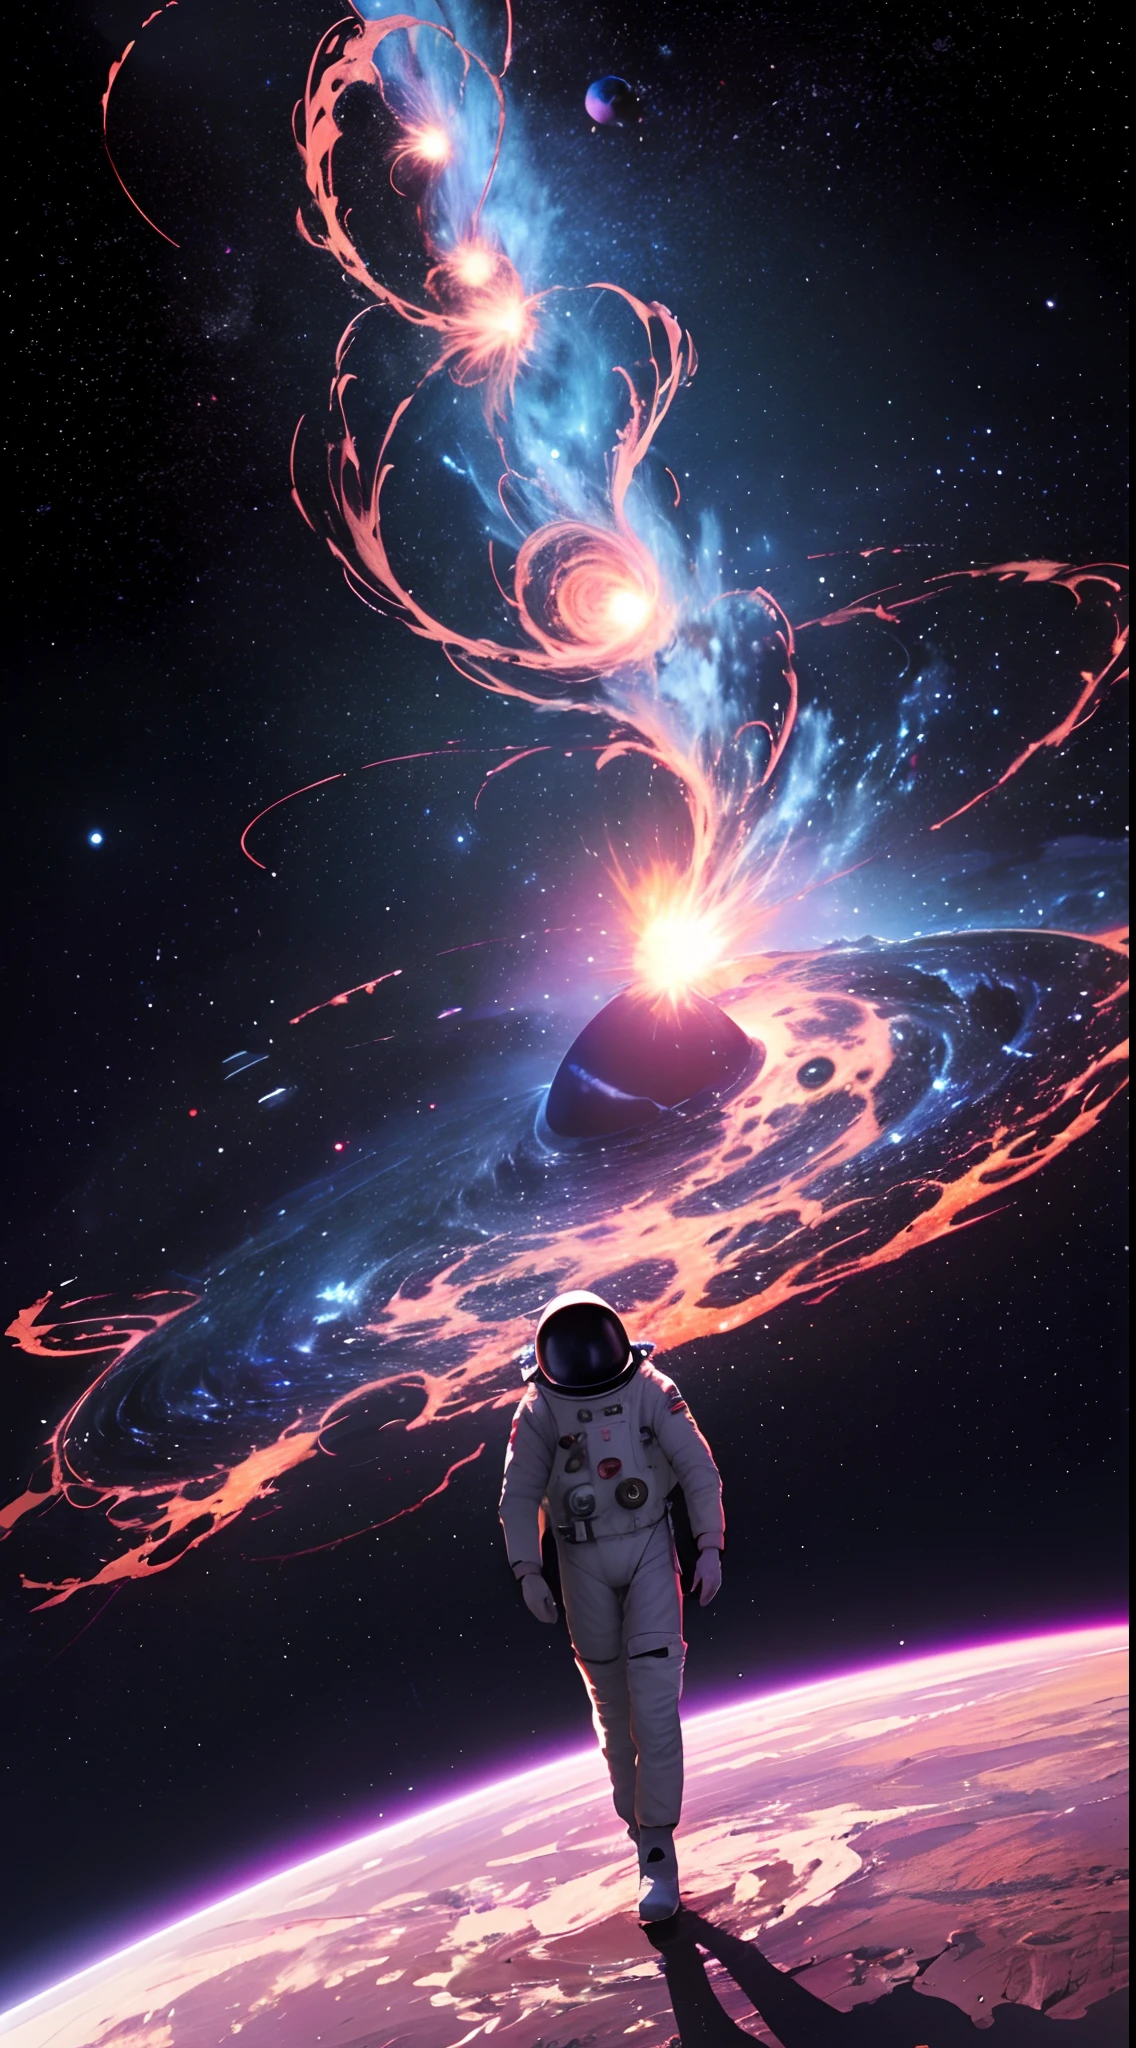 (A girl,Solo,Cowboy shot,a Astronauts in spacesuits floating on a spacecraft surrounded by planets,Behind a highly complex spacecraft,Biomechanical style:1.35),(Blown high in the sky by the interstellar wind,Travel through the universe,Its passengers are a jumble crew of alien life forms,Wear an astronaut suit,Seek knowledge and answers on the vast planet:1.2),The sky above him cracked,A river of fire overflows like a dying star,A white dwarf,neutron star,black hole,Give up the last respite, Heralding a new era of life,Balkcon,Tentacle,todos vendo olho,Cable wool,Space plants,Space nematodes,Space travelling, Space travelling, psychedelic illustrations,Cosmic portal – The swirling mass of a black hole acts as a gateway to another dimension, Distorted time and space as we know it,